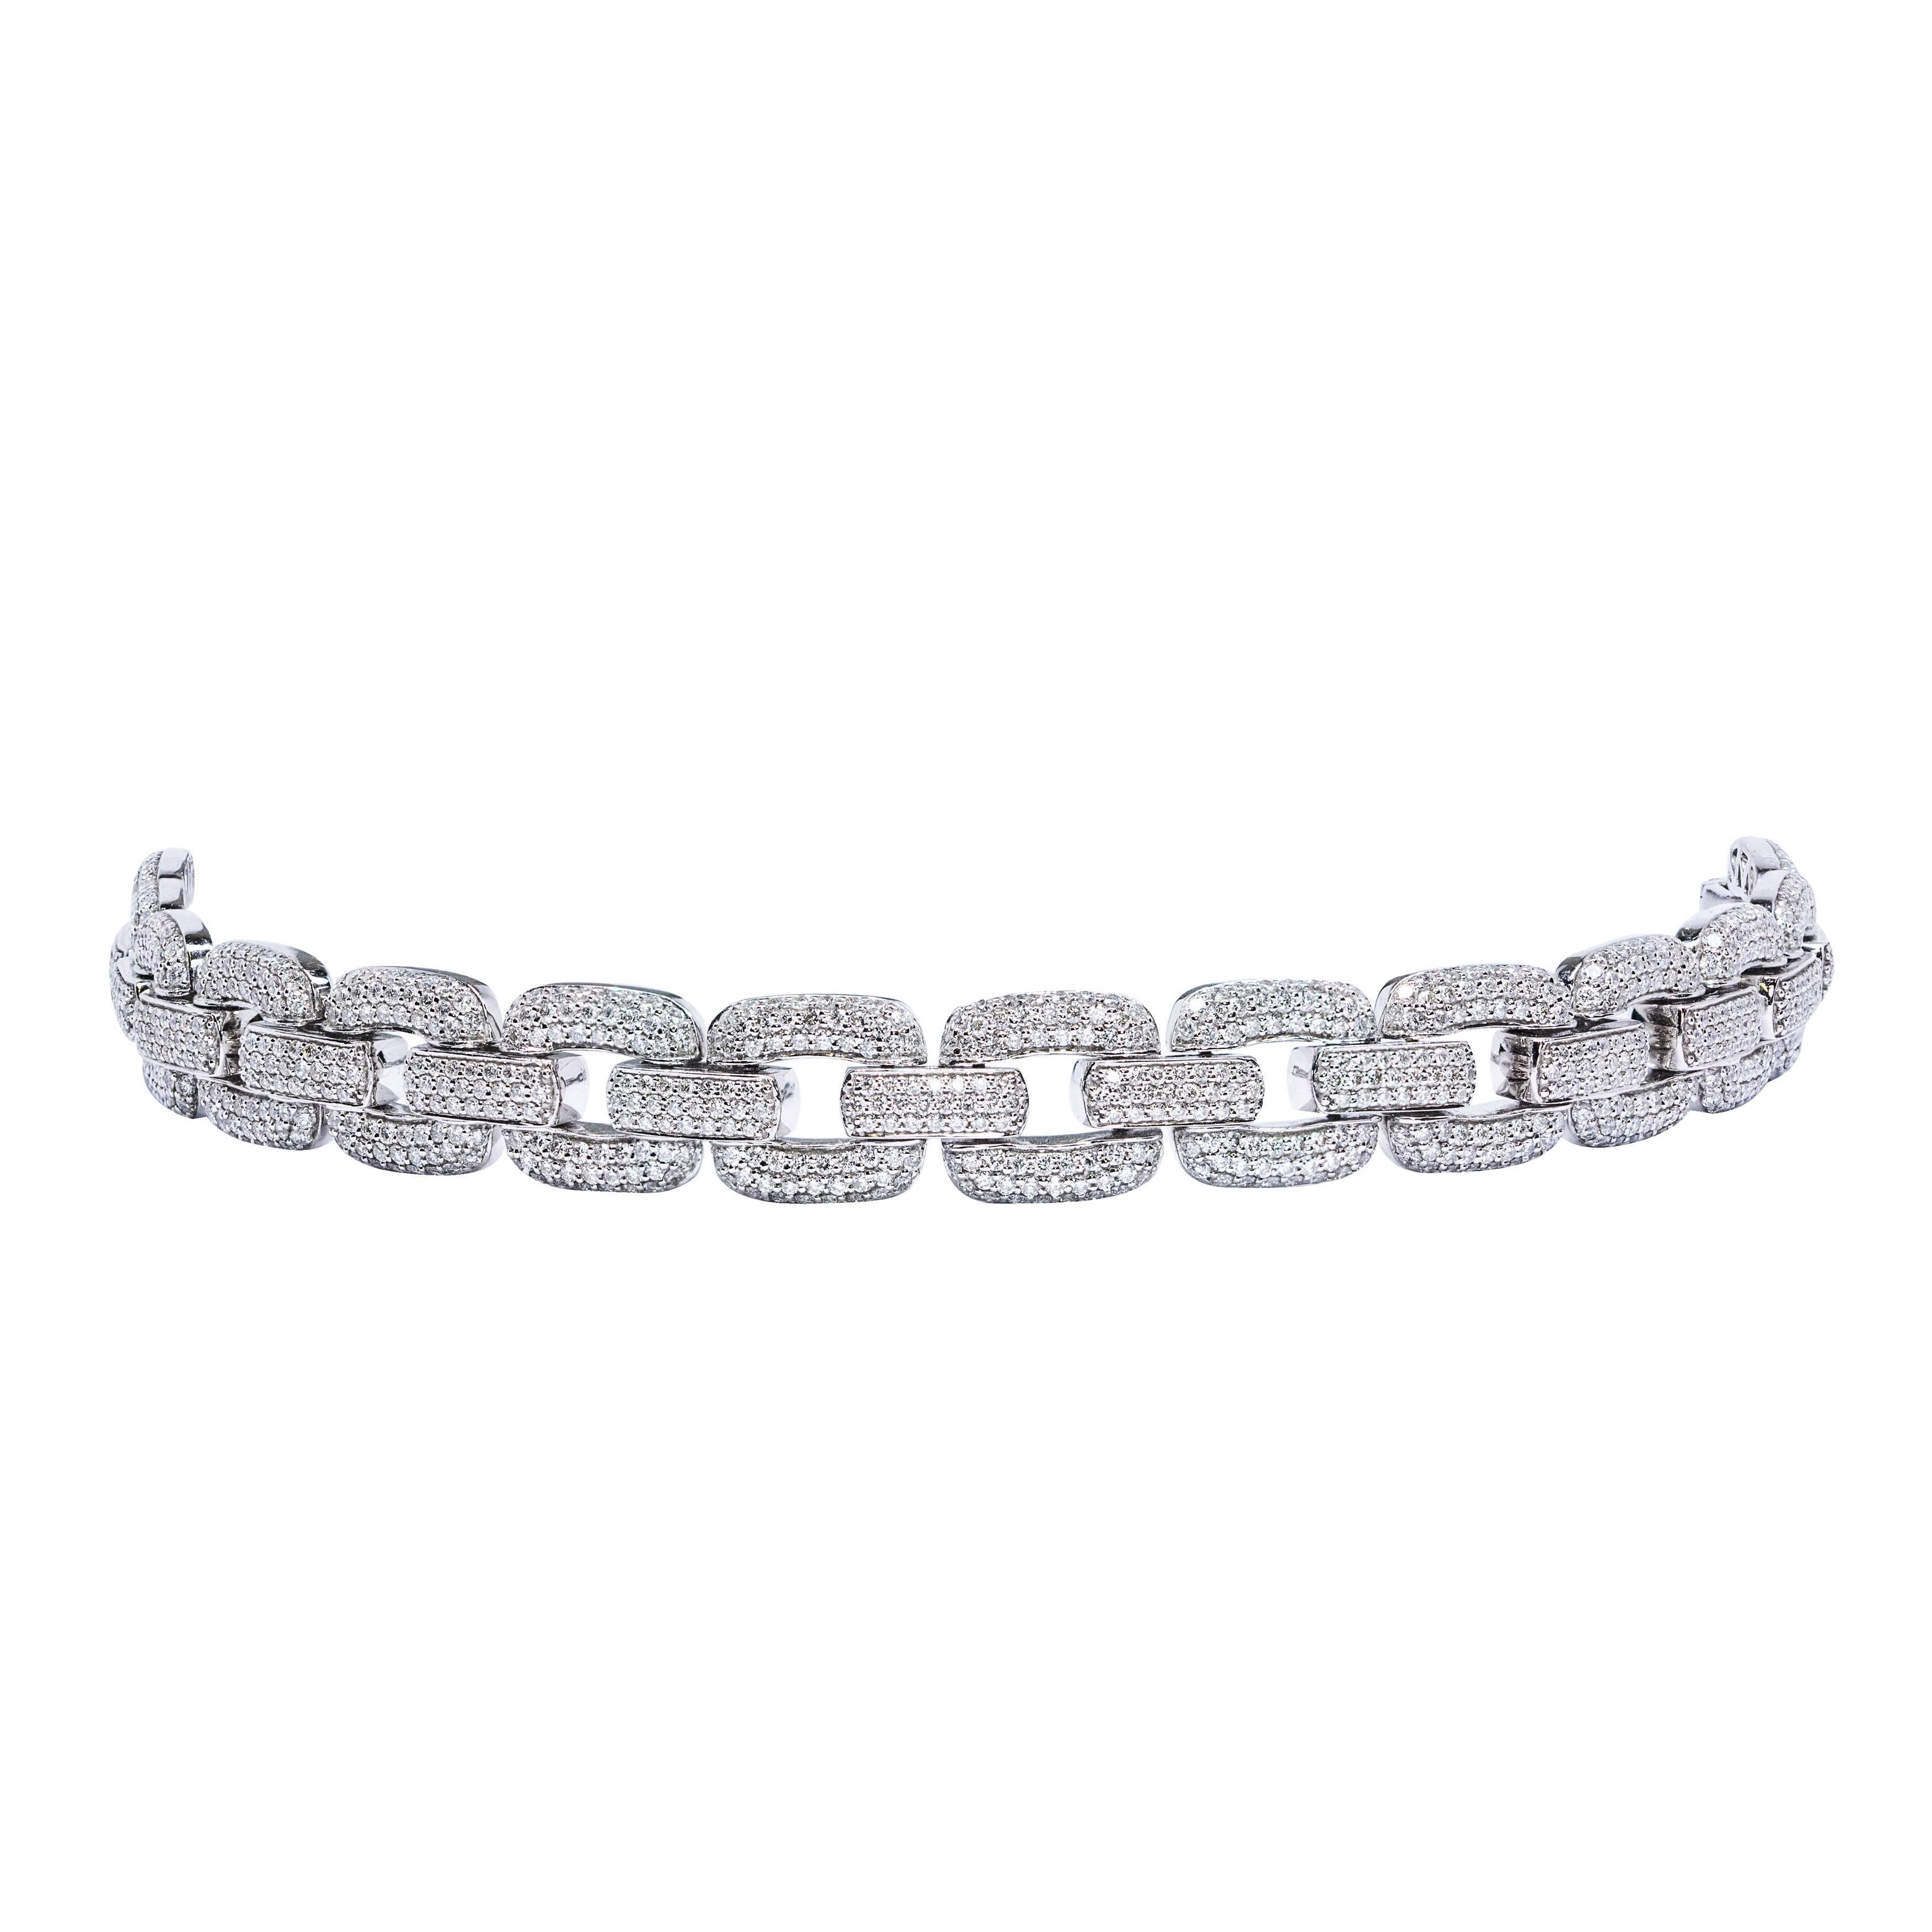 A stunning bracelet wherein each link is micro-pave set with round brilliant diamonds. Diamonds weigh a stunning 6.55 carats total. Diamonds are approximately F color VS clarity. A very glamorous piece of jewelry perfect for Gala or special